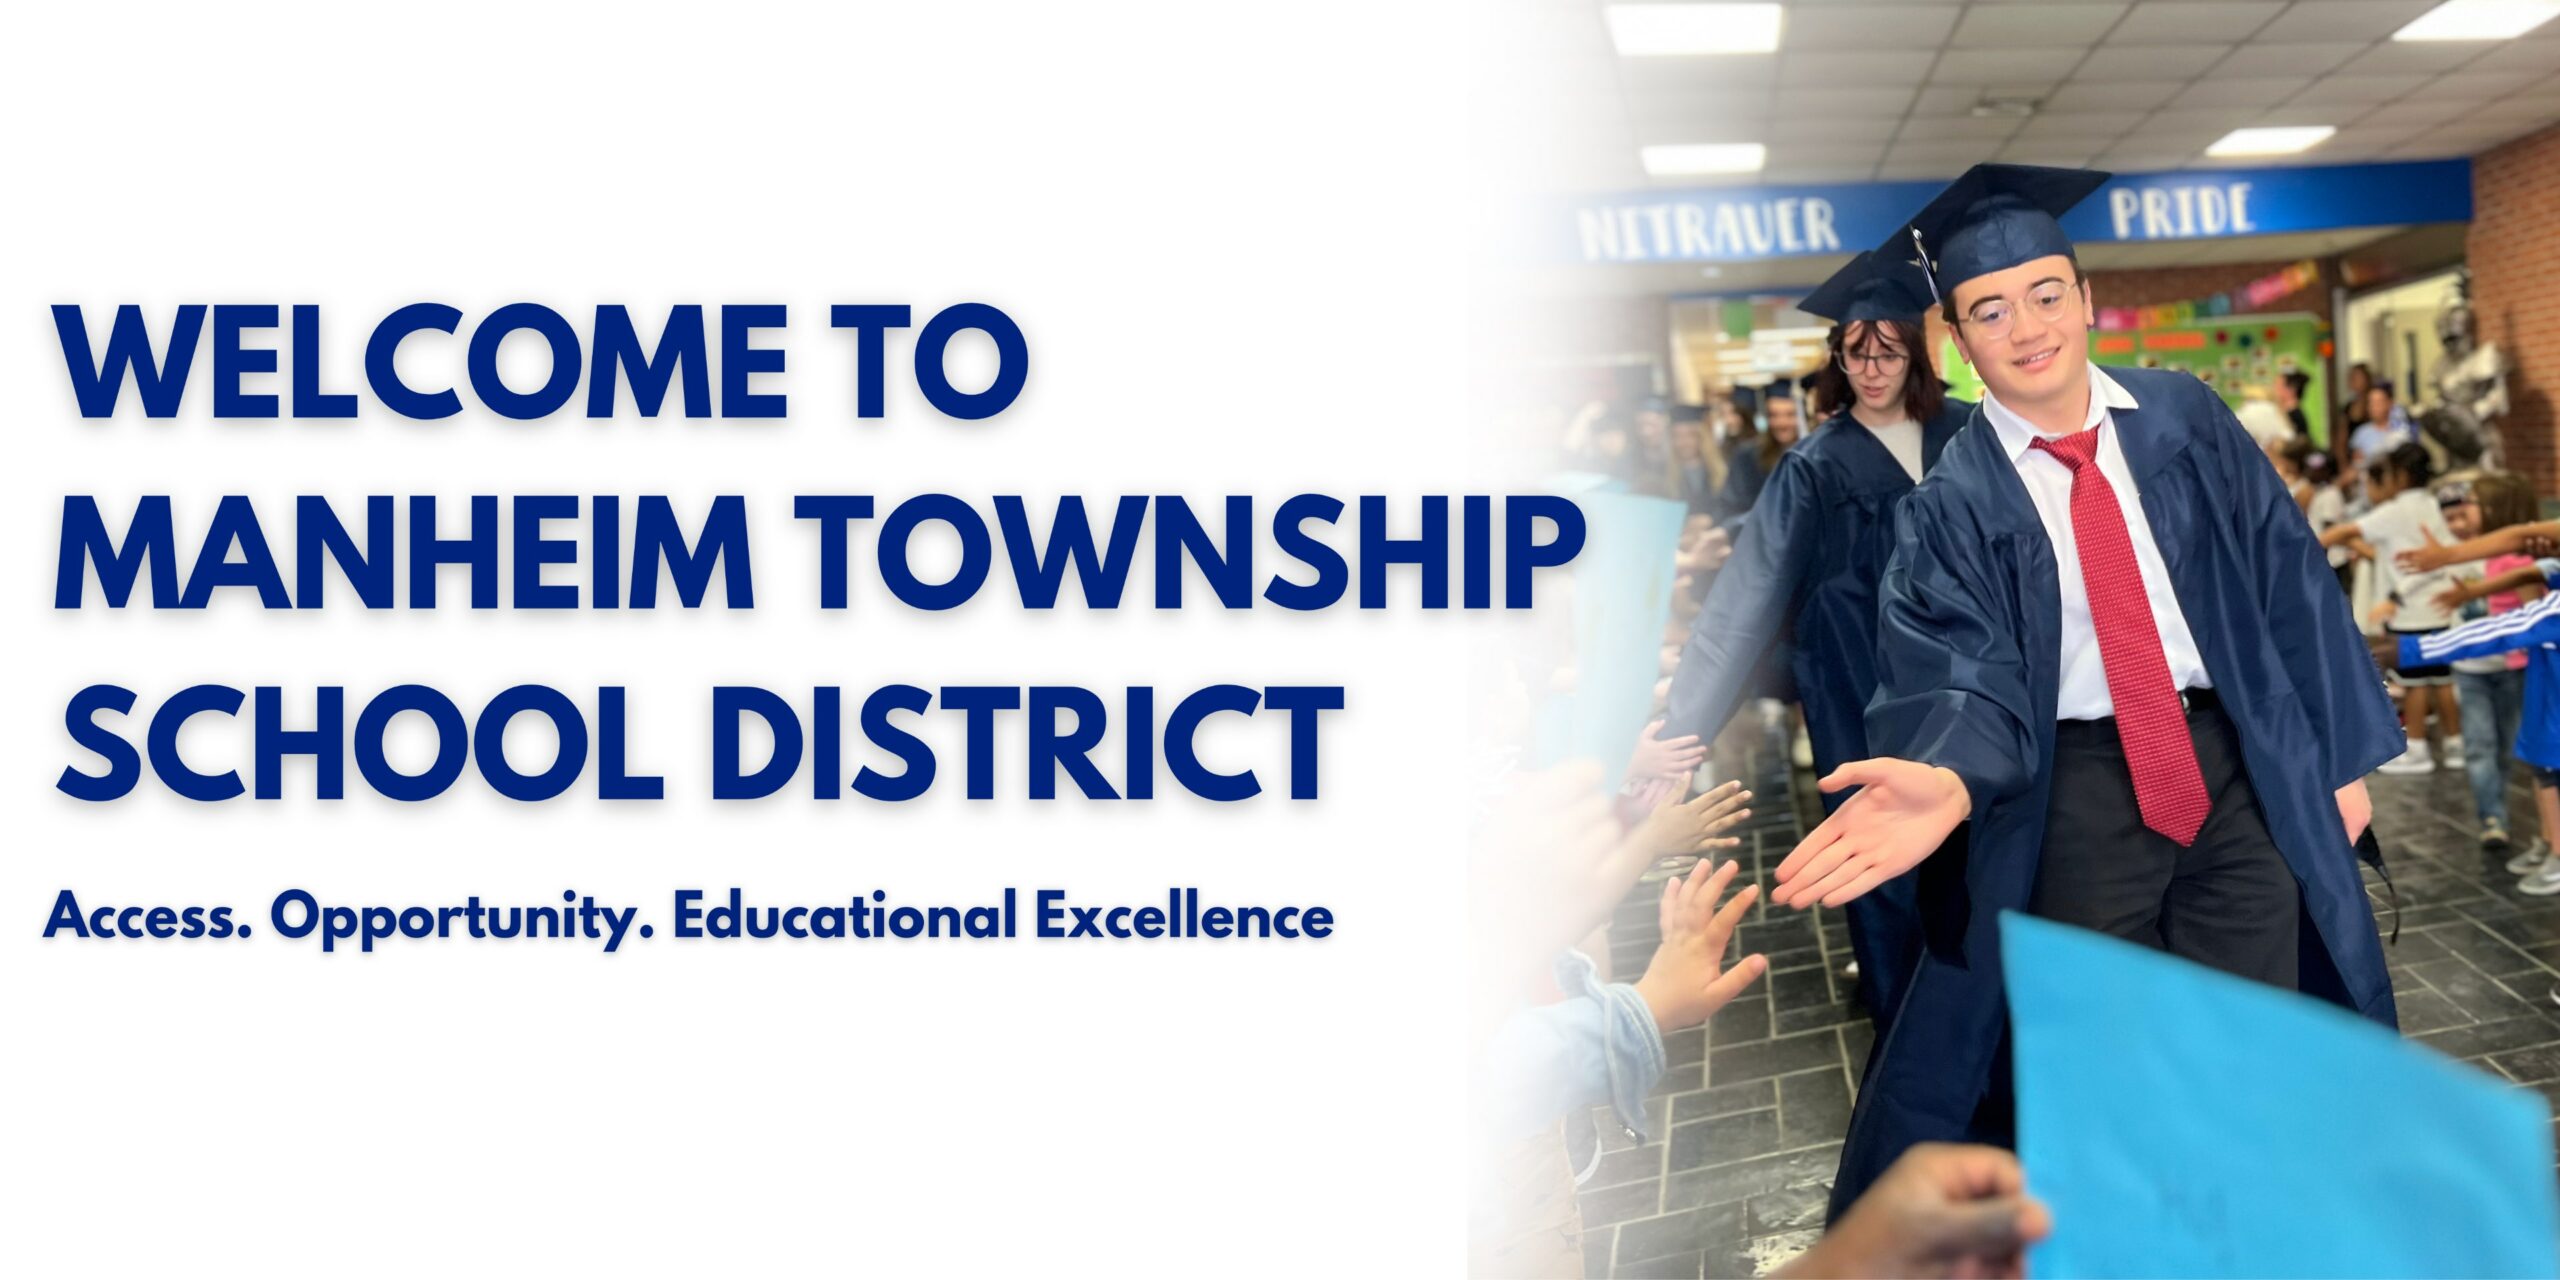 Welcome to Manheim Township School District - Access - Opportunity - Educational Excellence